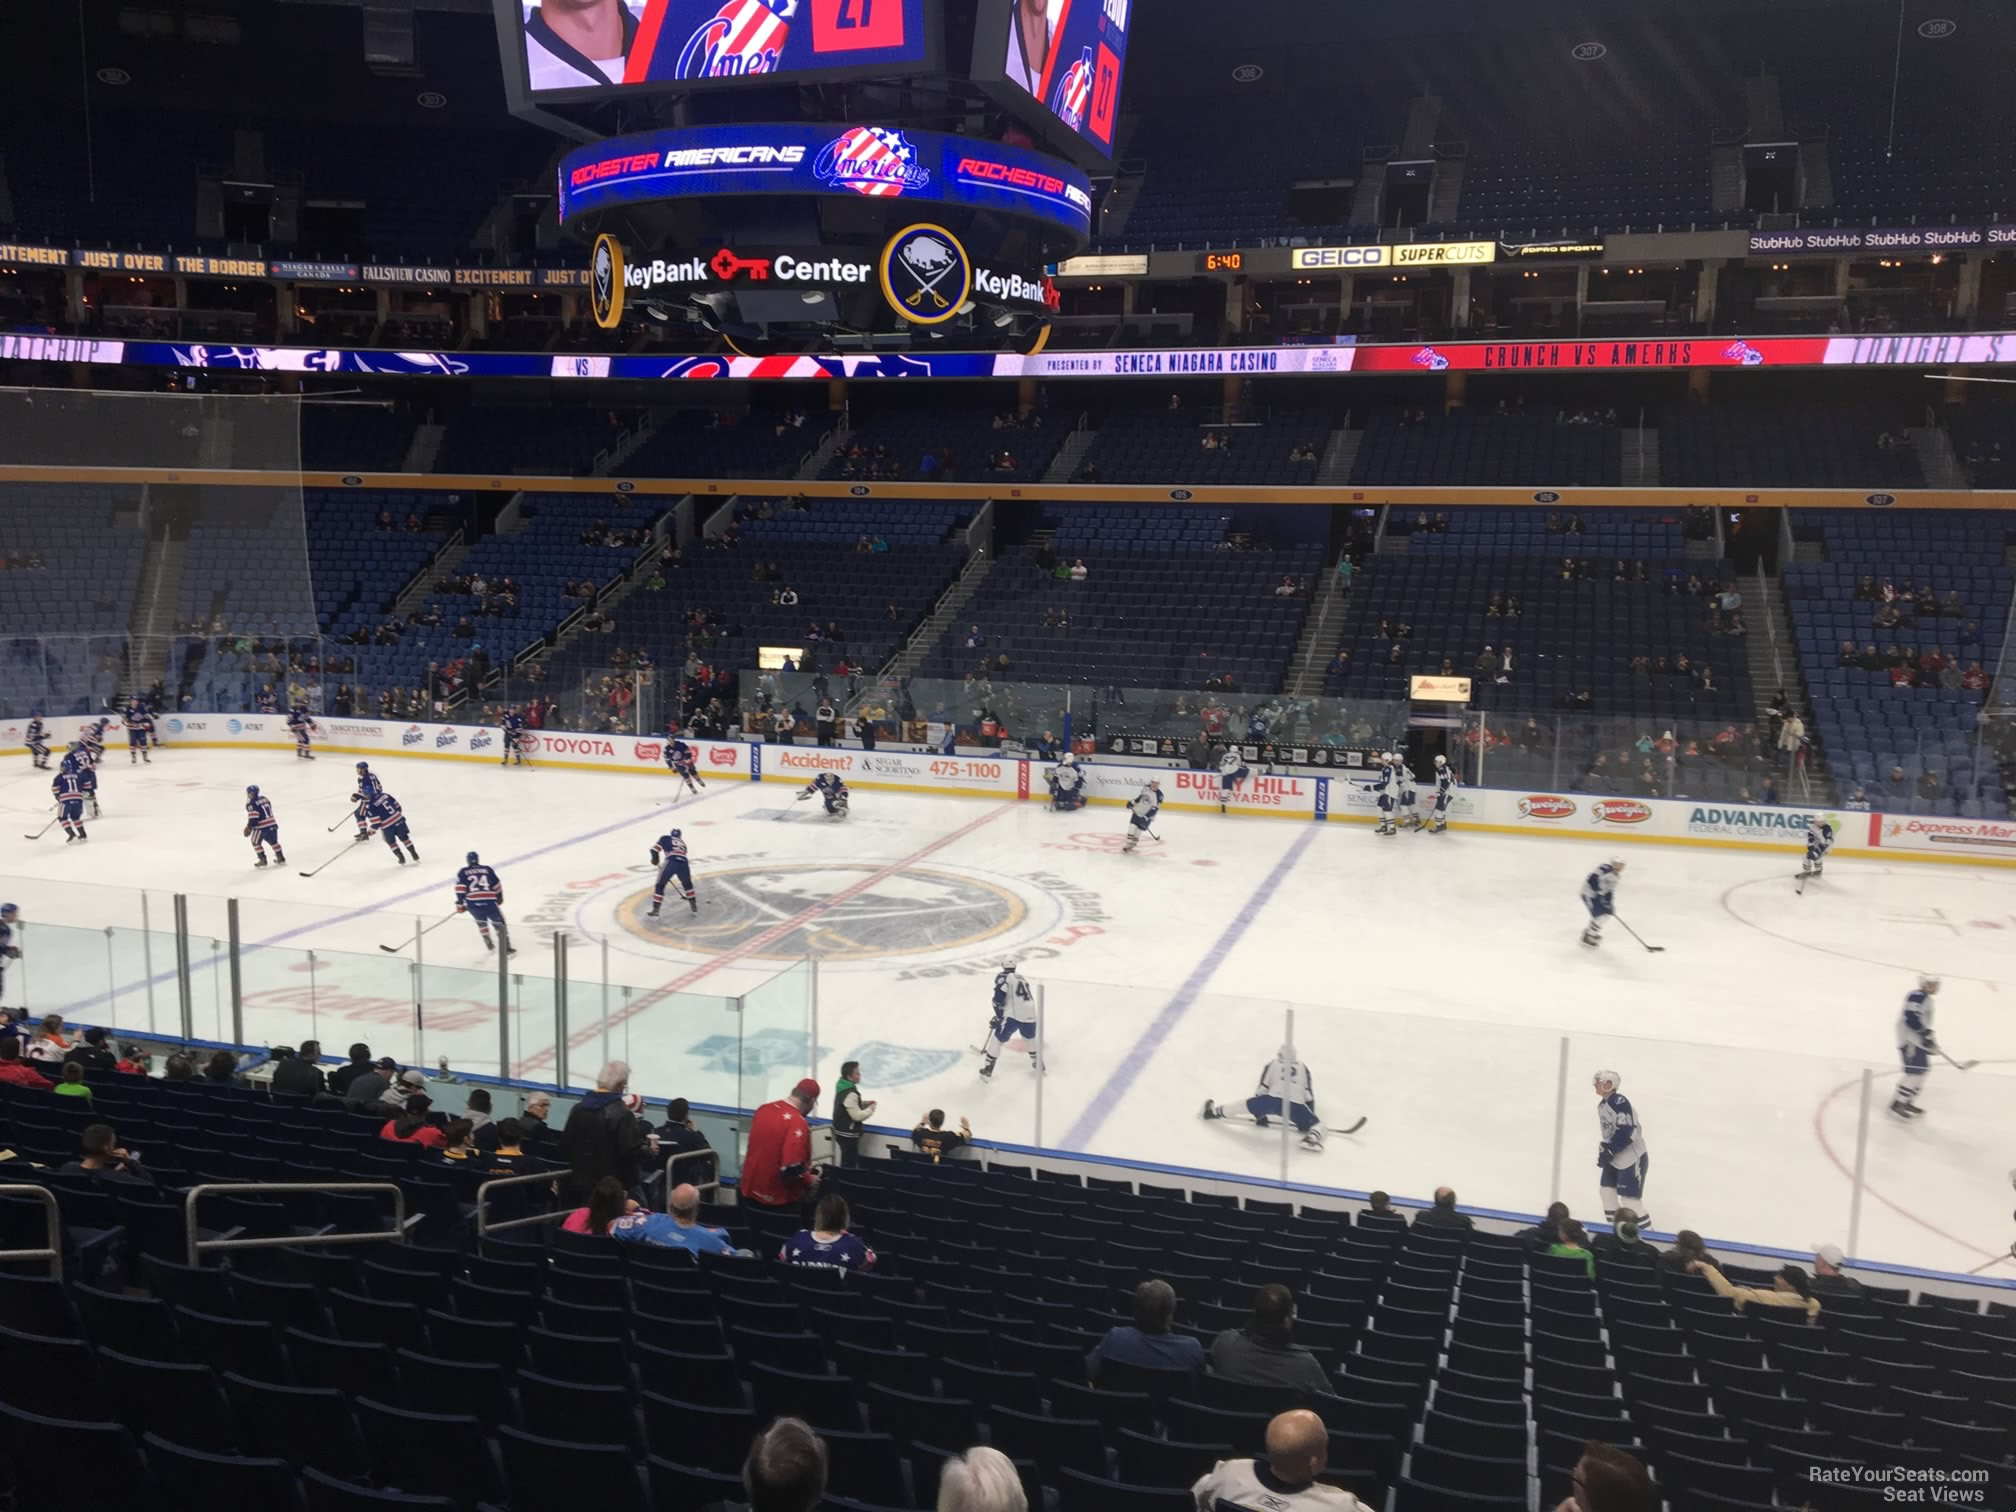 section 116, row 22 seat view  for hockey - keybank center